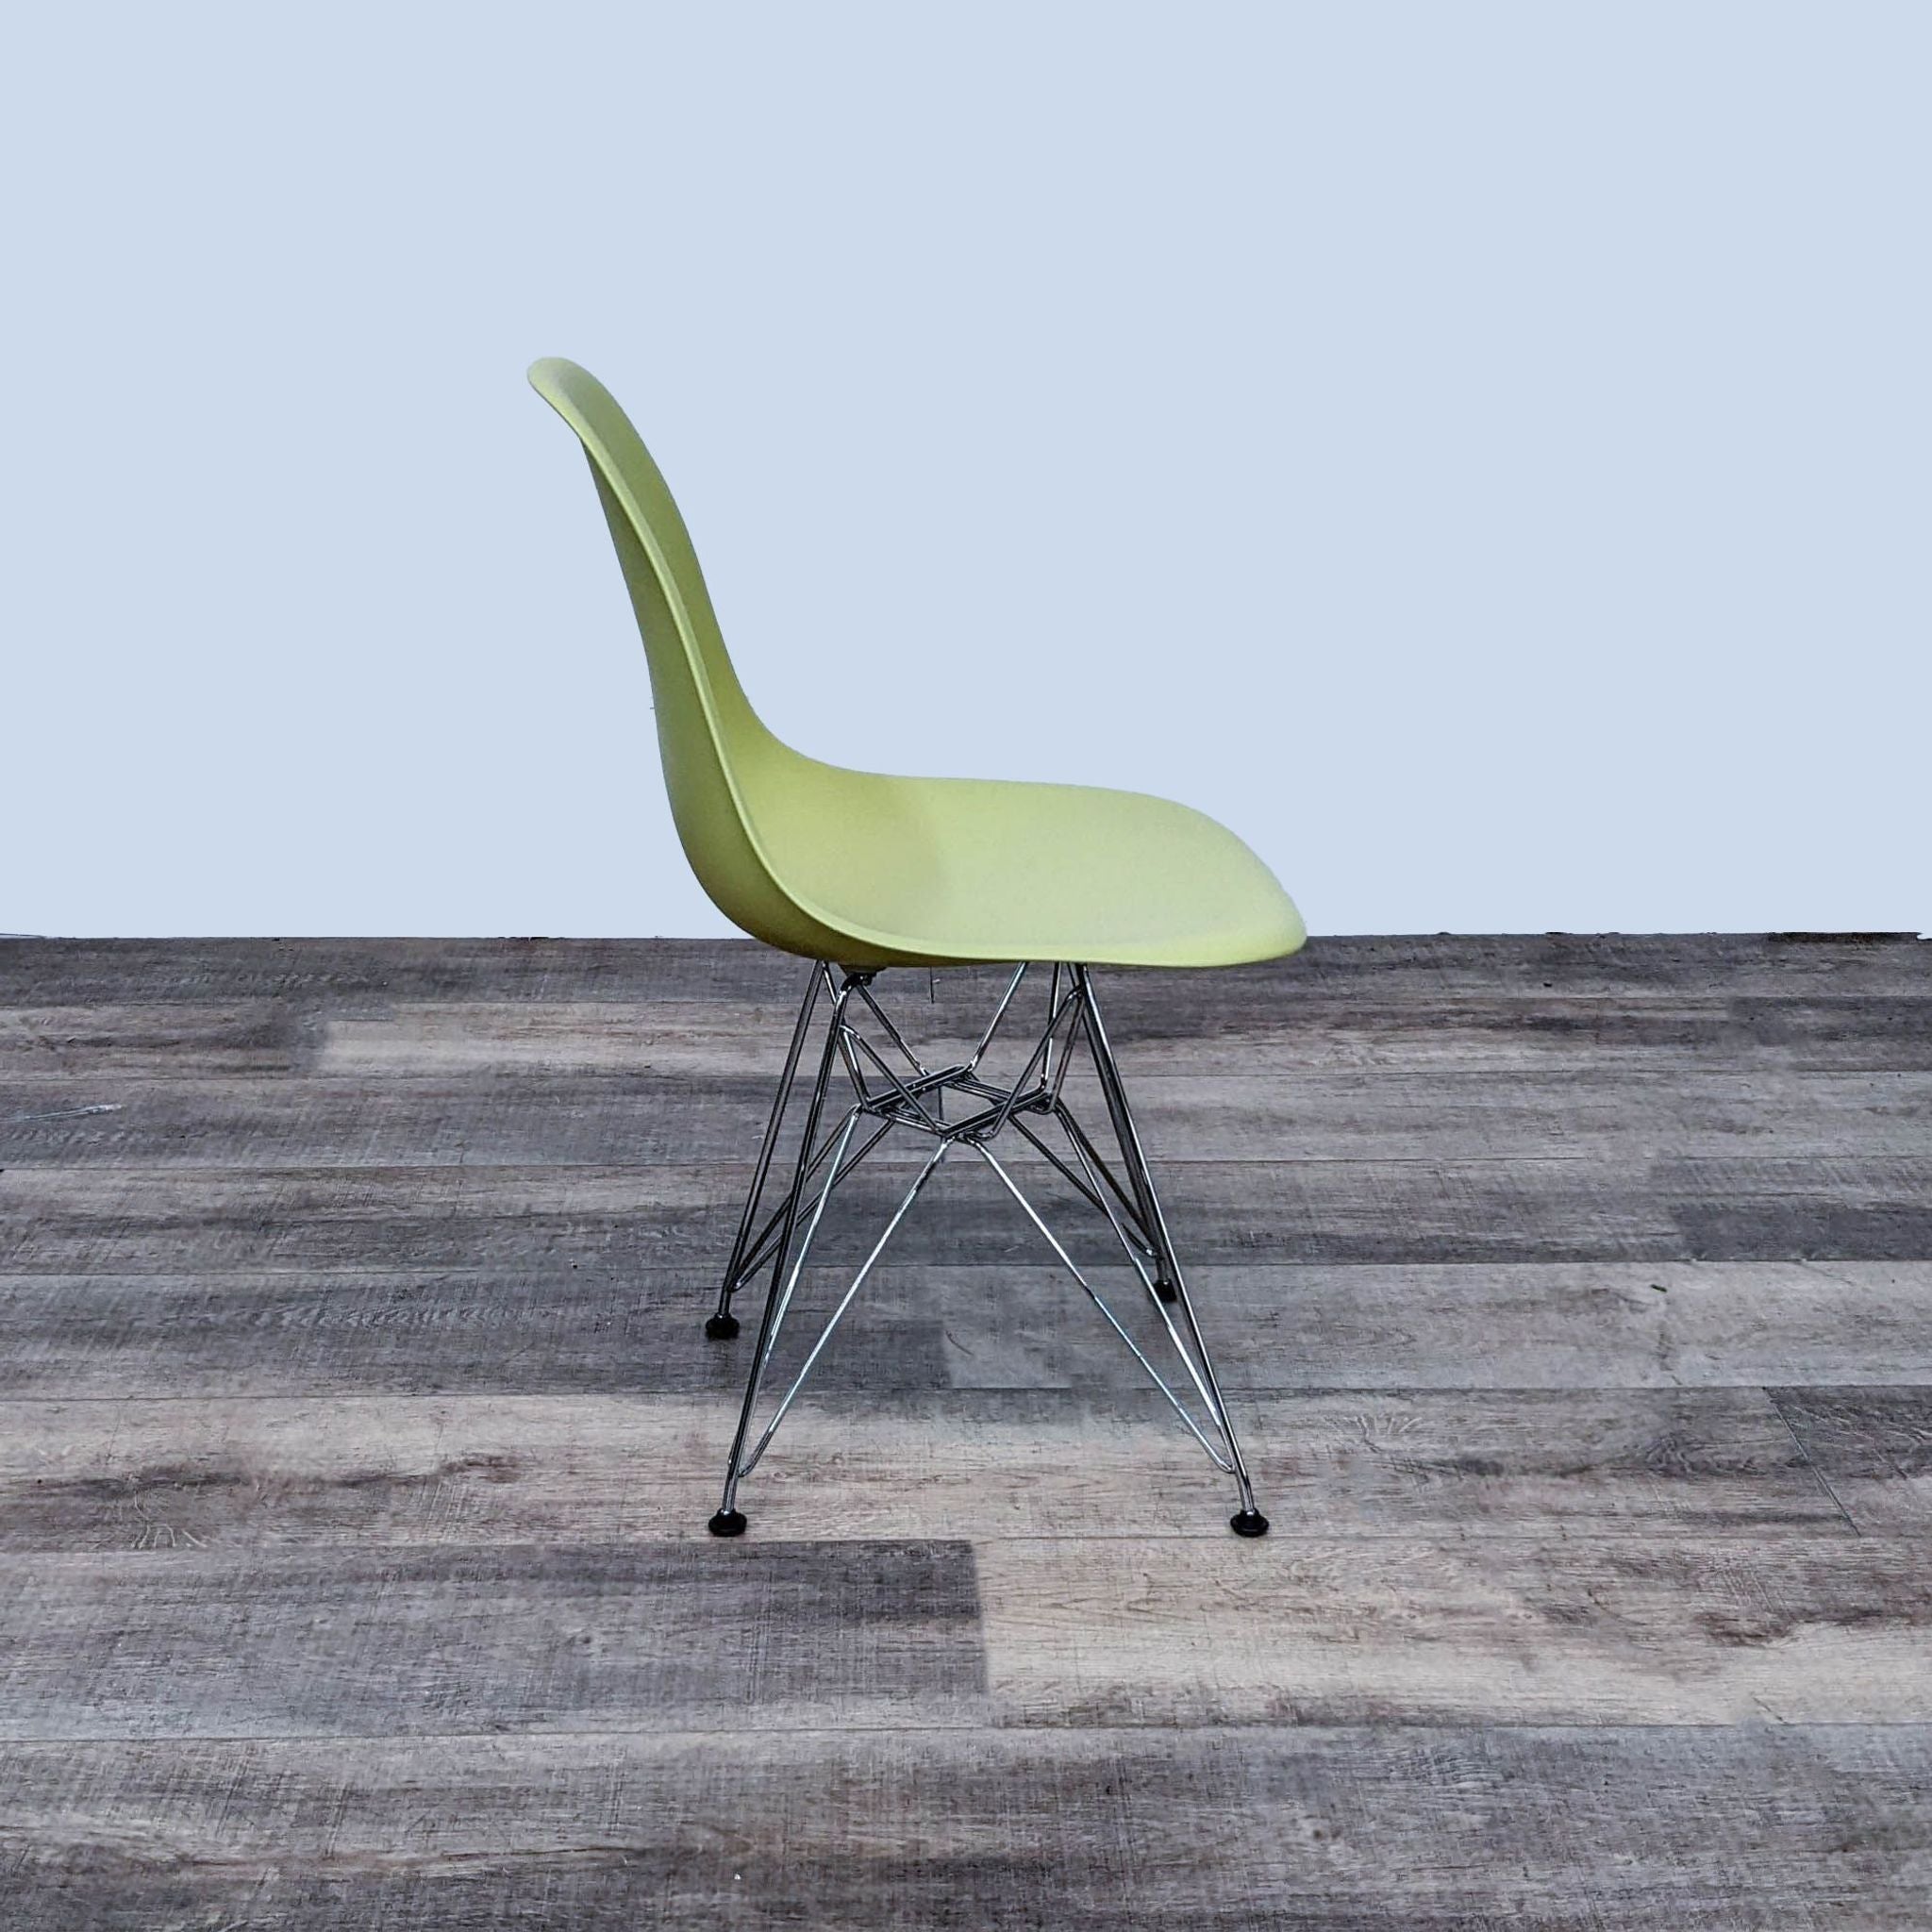 Alt text 2: Side view of a Vitra Eames chair with flexible back and waterfall edge, set against a plain background.